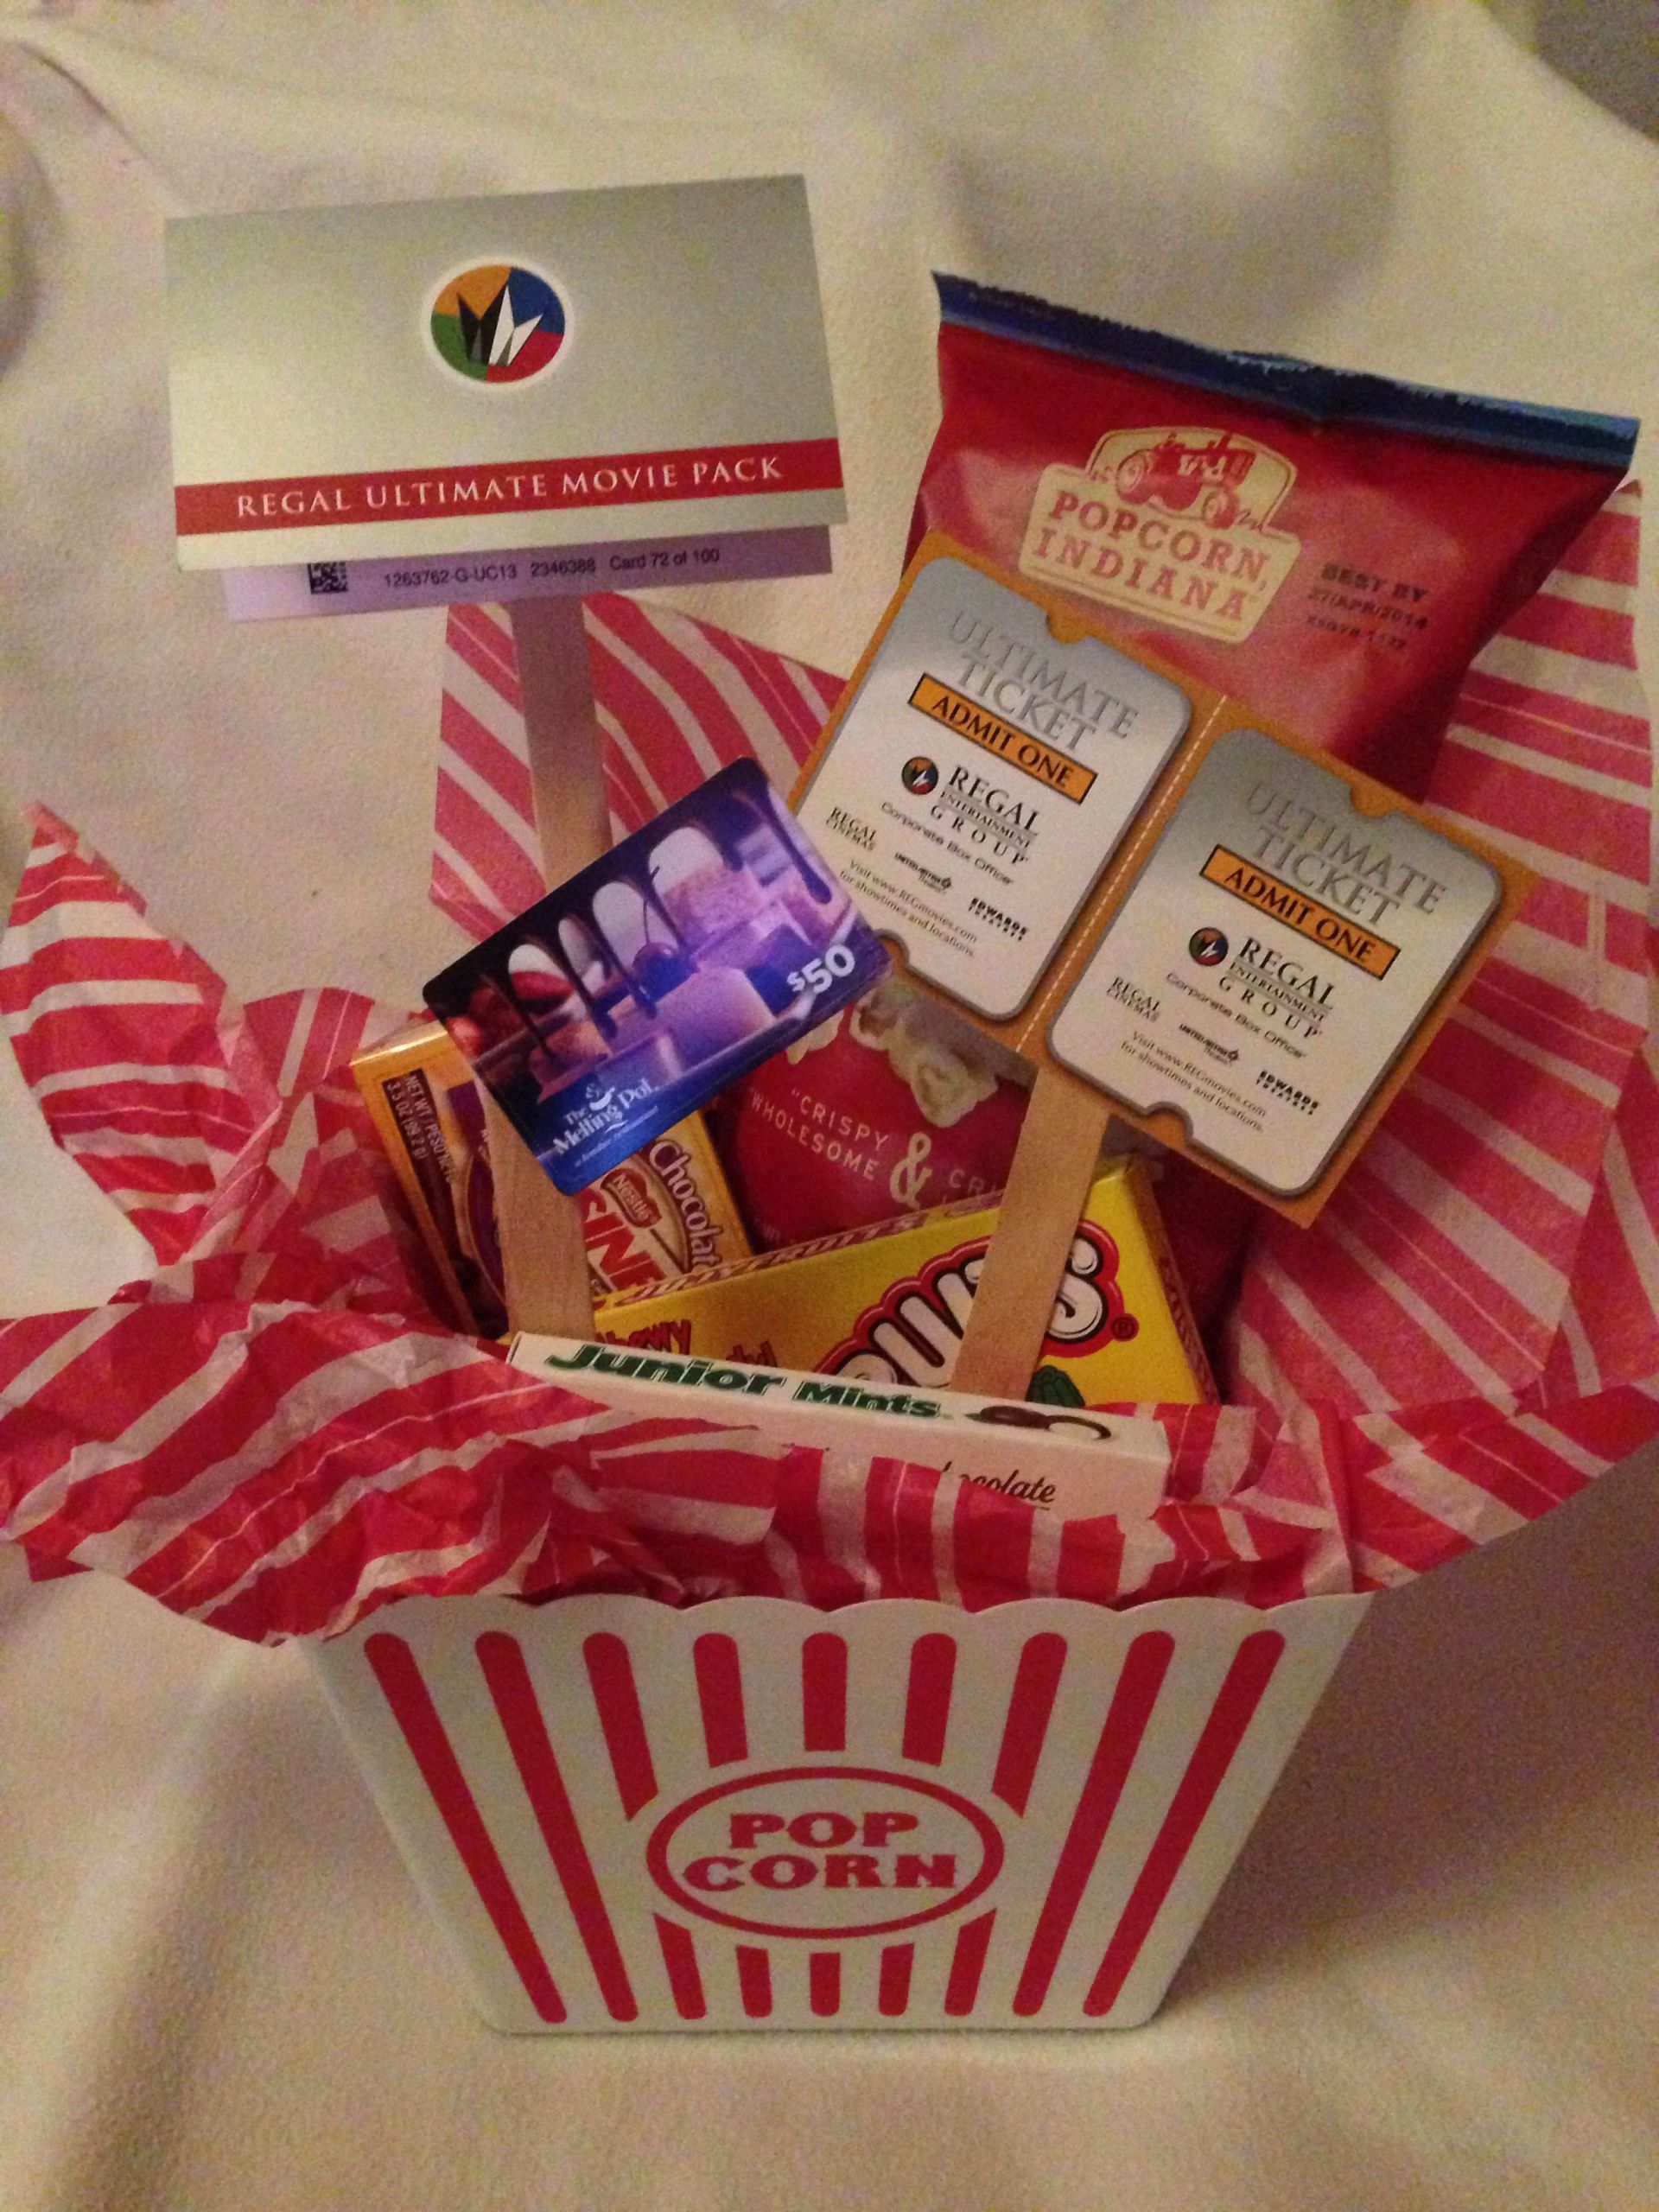 Movie Gift Card Basket Ideas
 Dinner & a movie Gift Movie theater snacks bag of